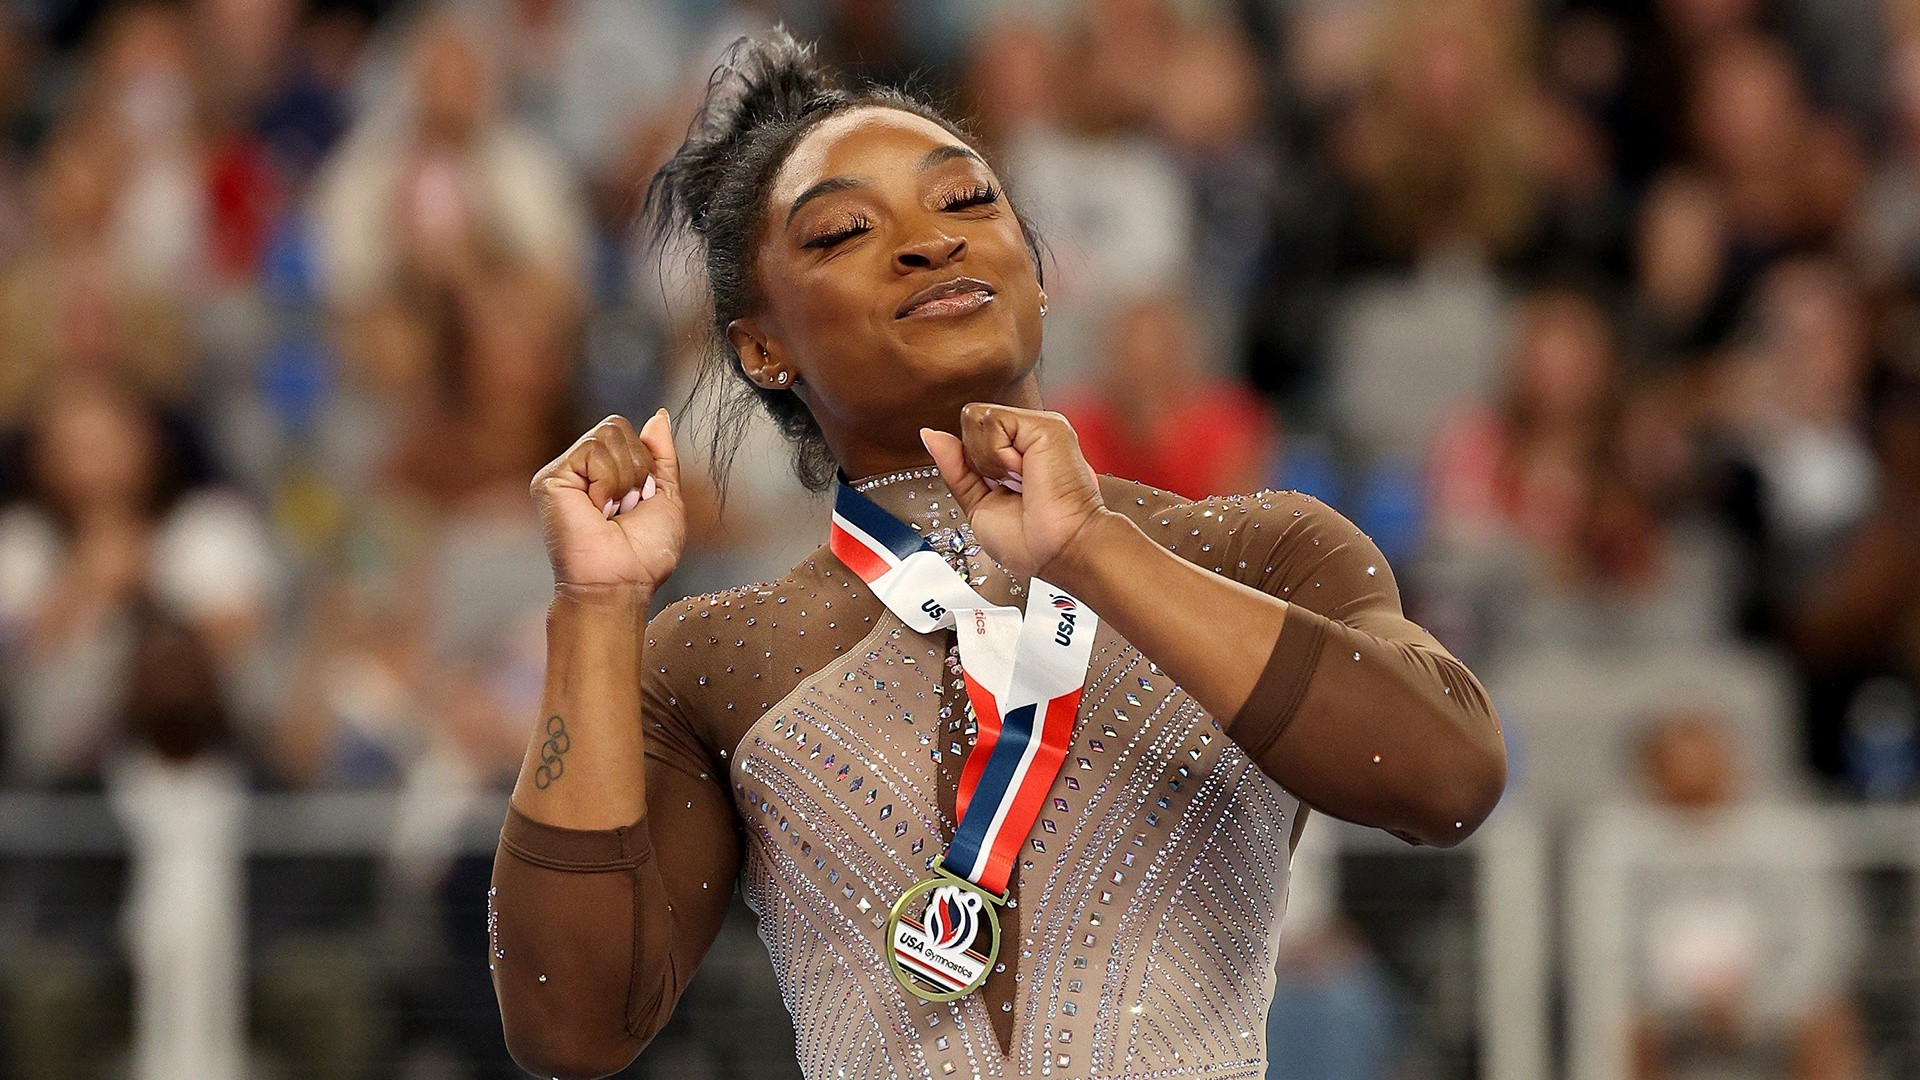 Simone Biles wins gymnastics title, clinching spot for Olympics trial